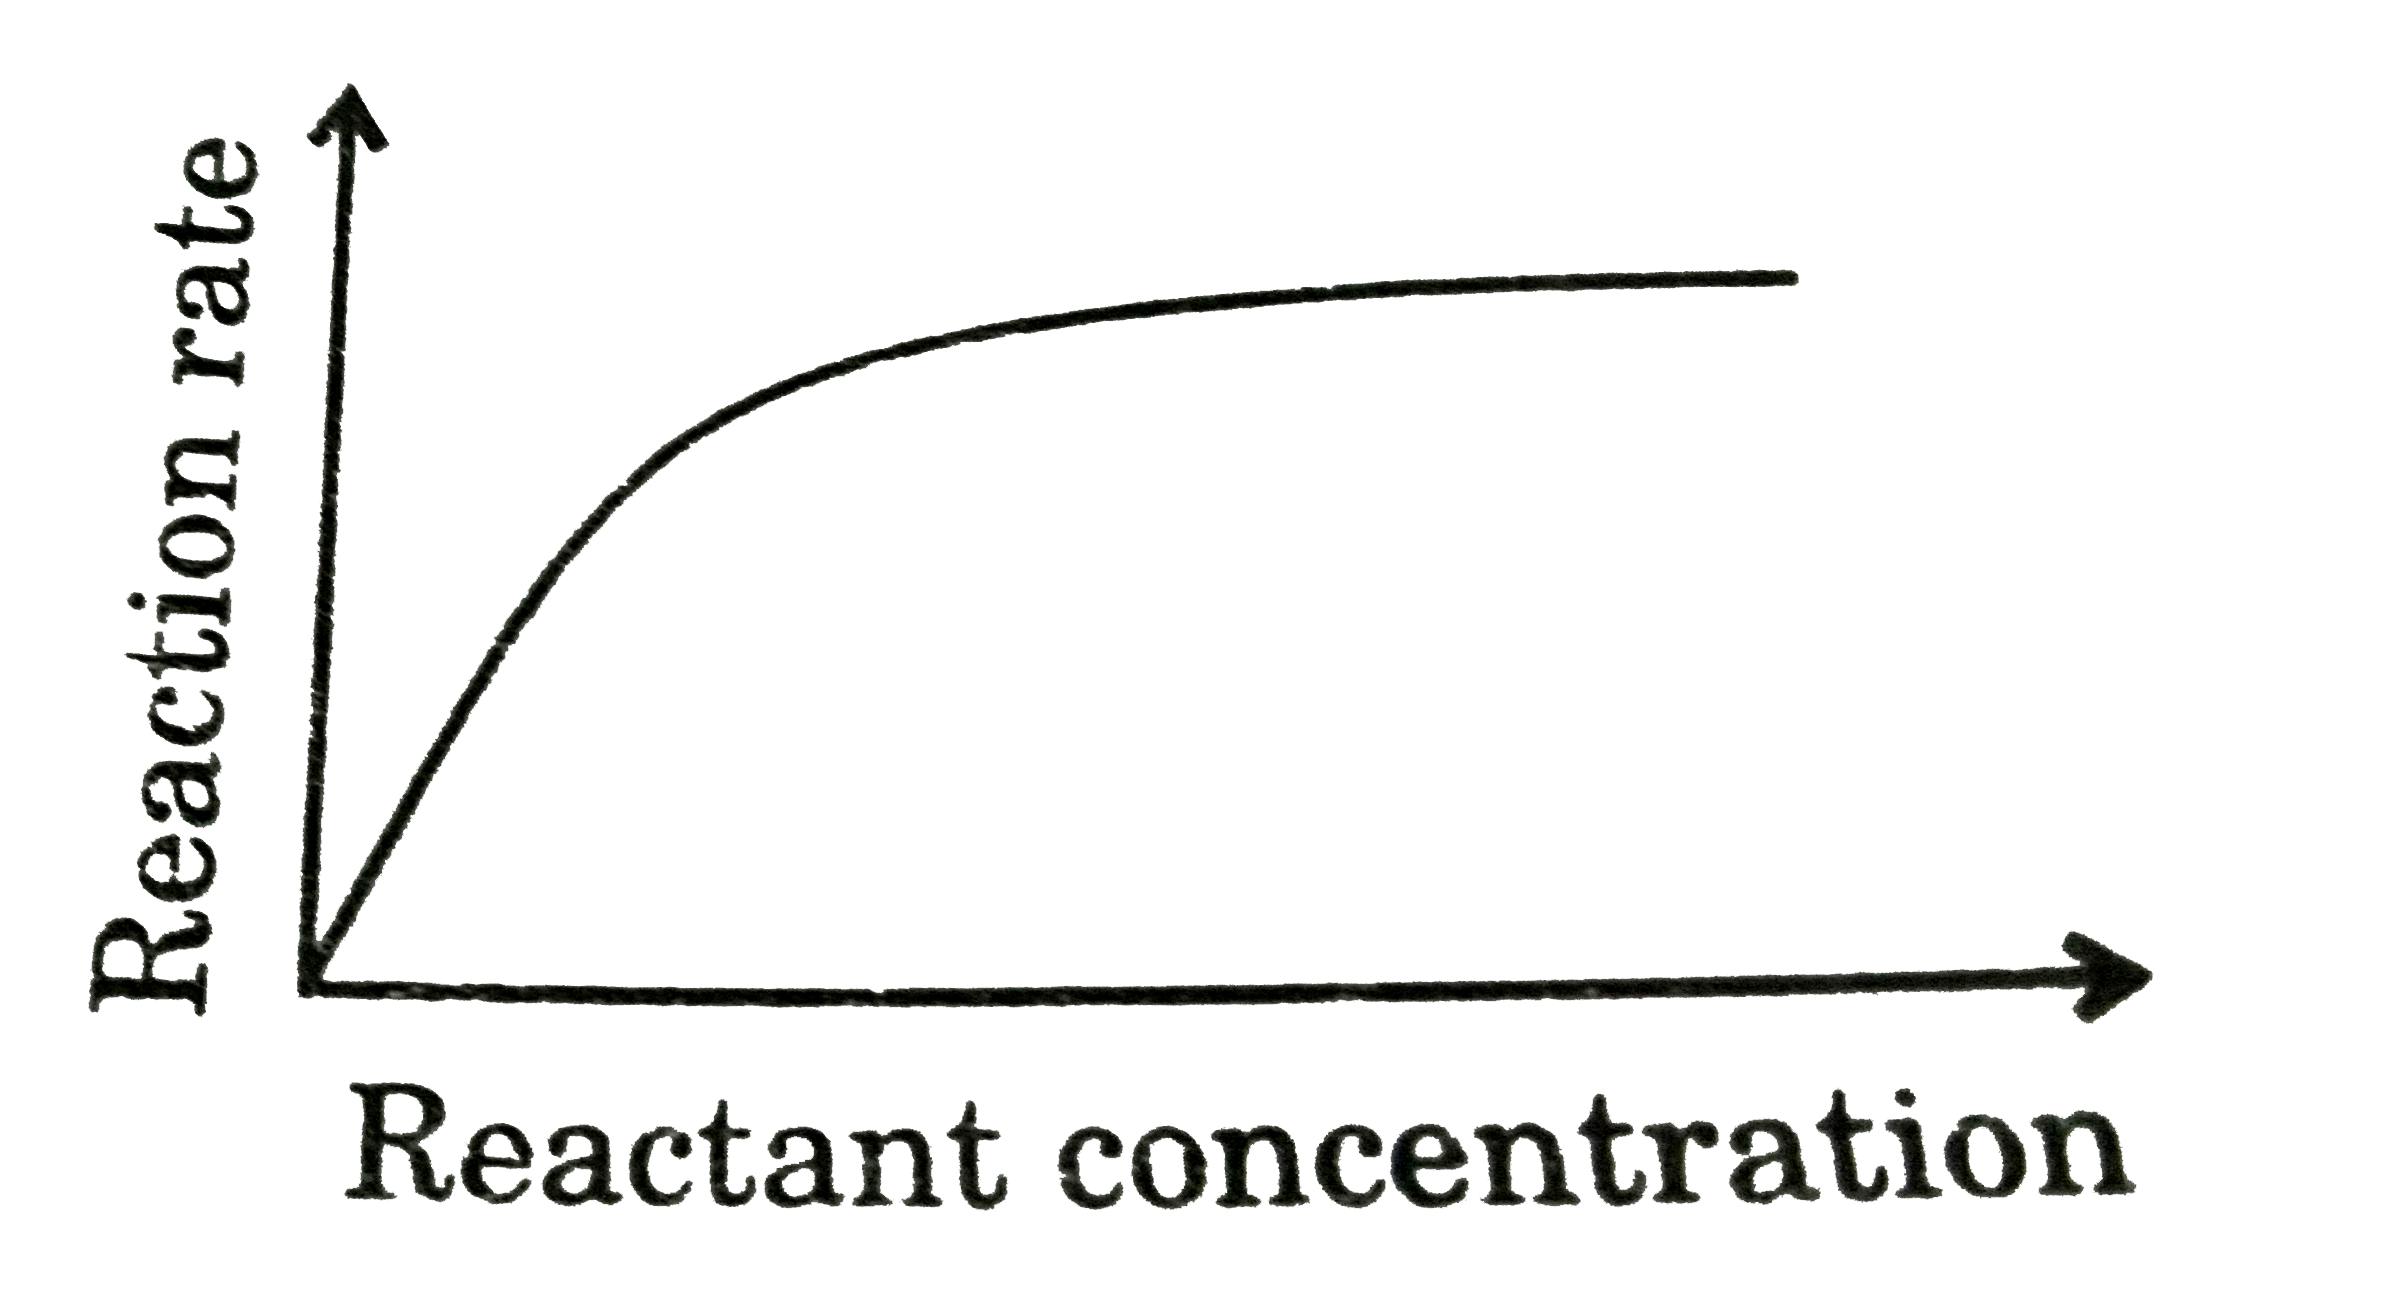 Curves with the shape shown are often observed for reactions involving catalysts. The level portion of the curve is best attributed to the fact that: